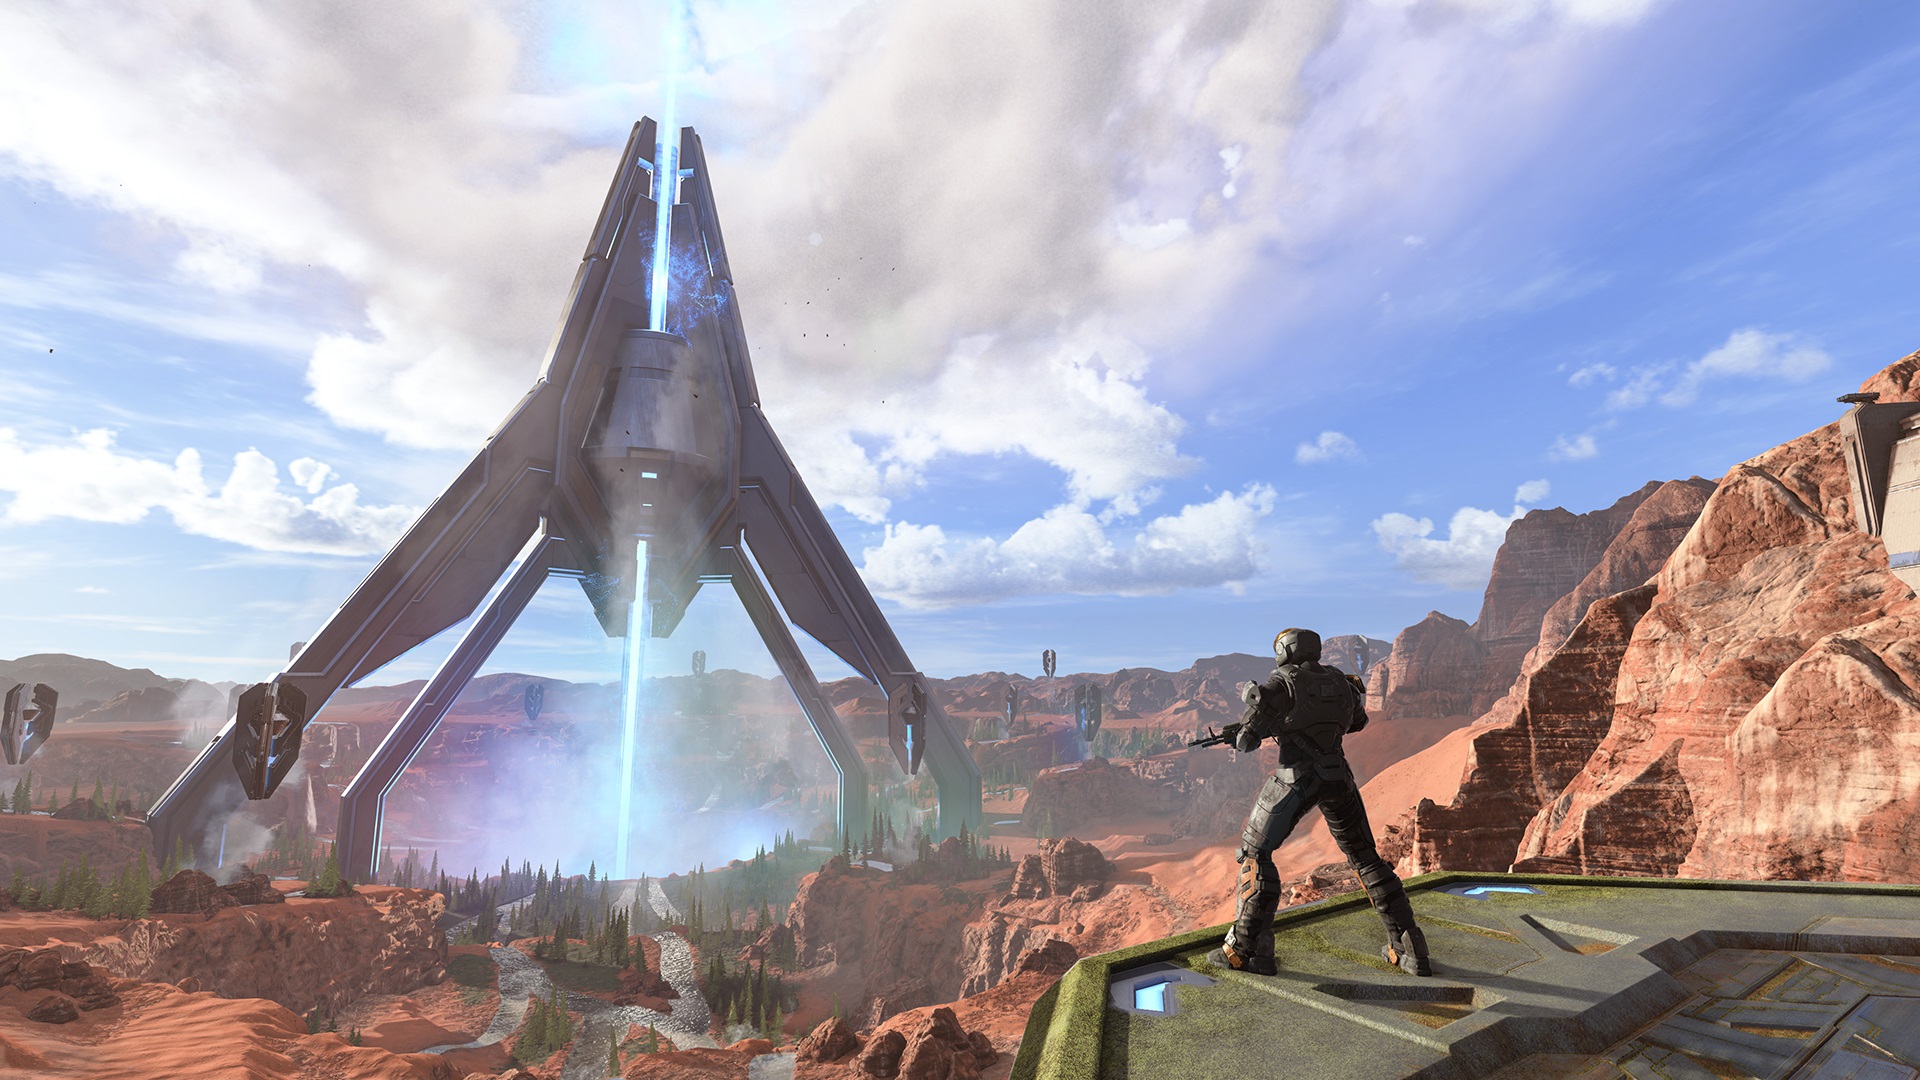 Header image for Halo Infinite Season 3 Maps & Modes blog showing a vista of Oasis with a MIRAGE IIC-clad Spartan looking at the Forerunner ship